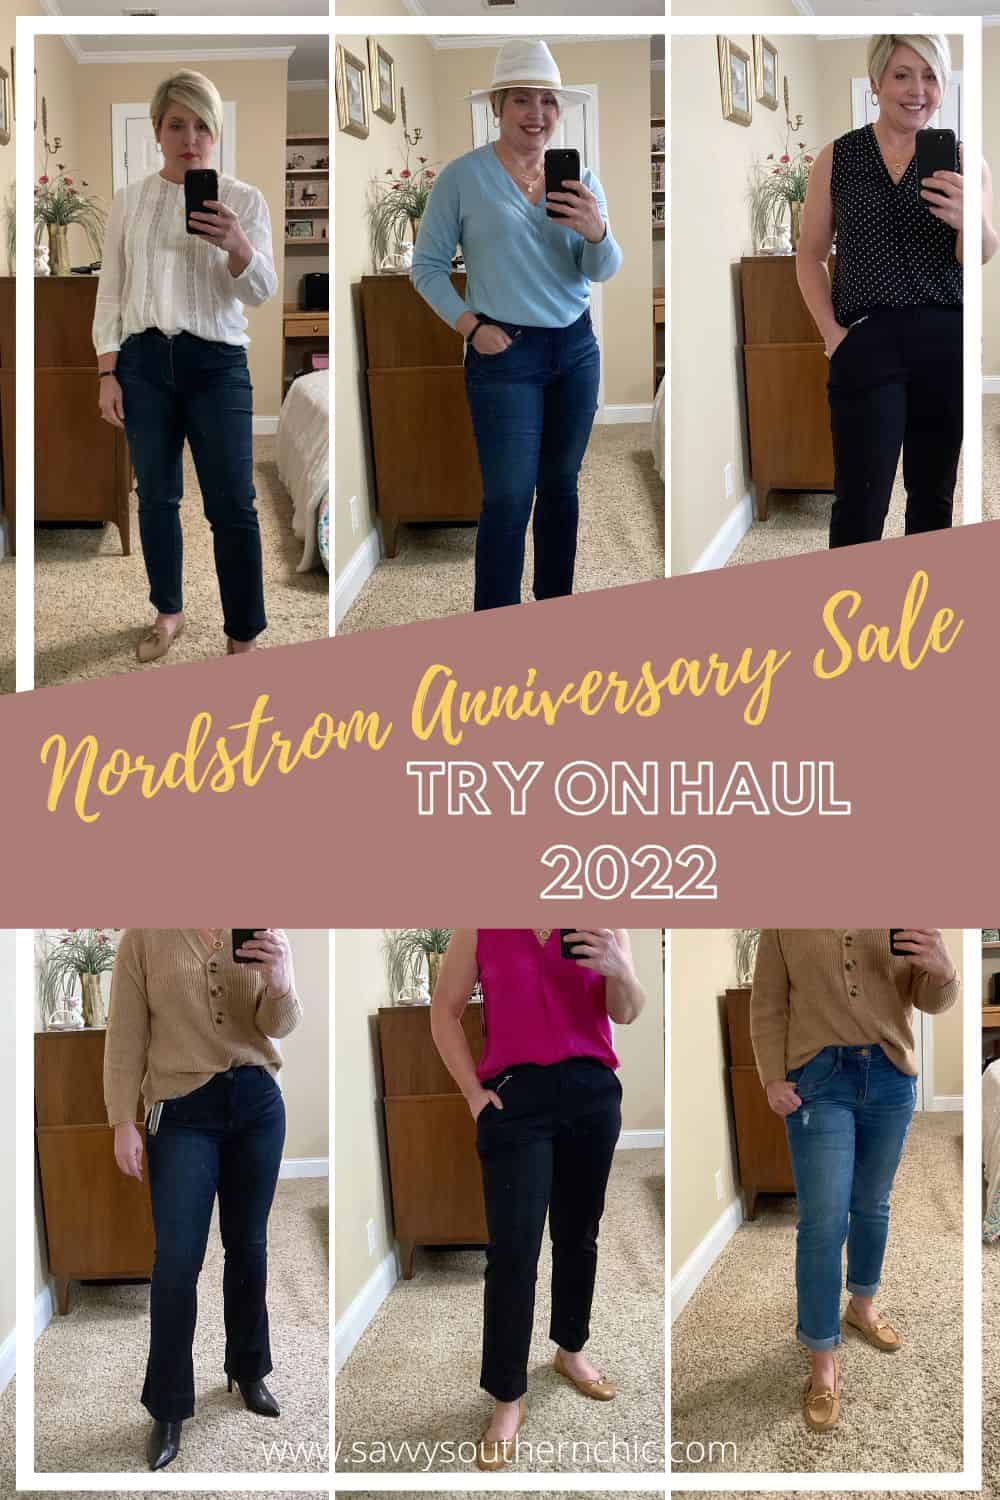 Nordstrom Try On Haul: Anniversary Sale 2022